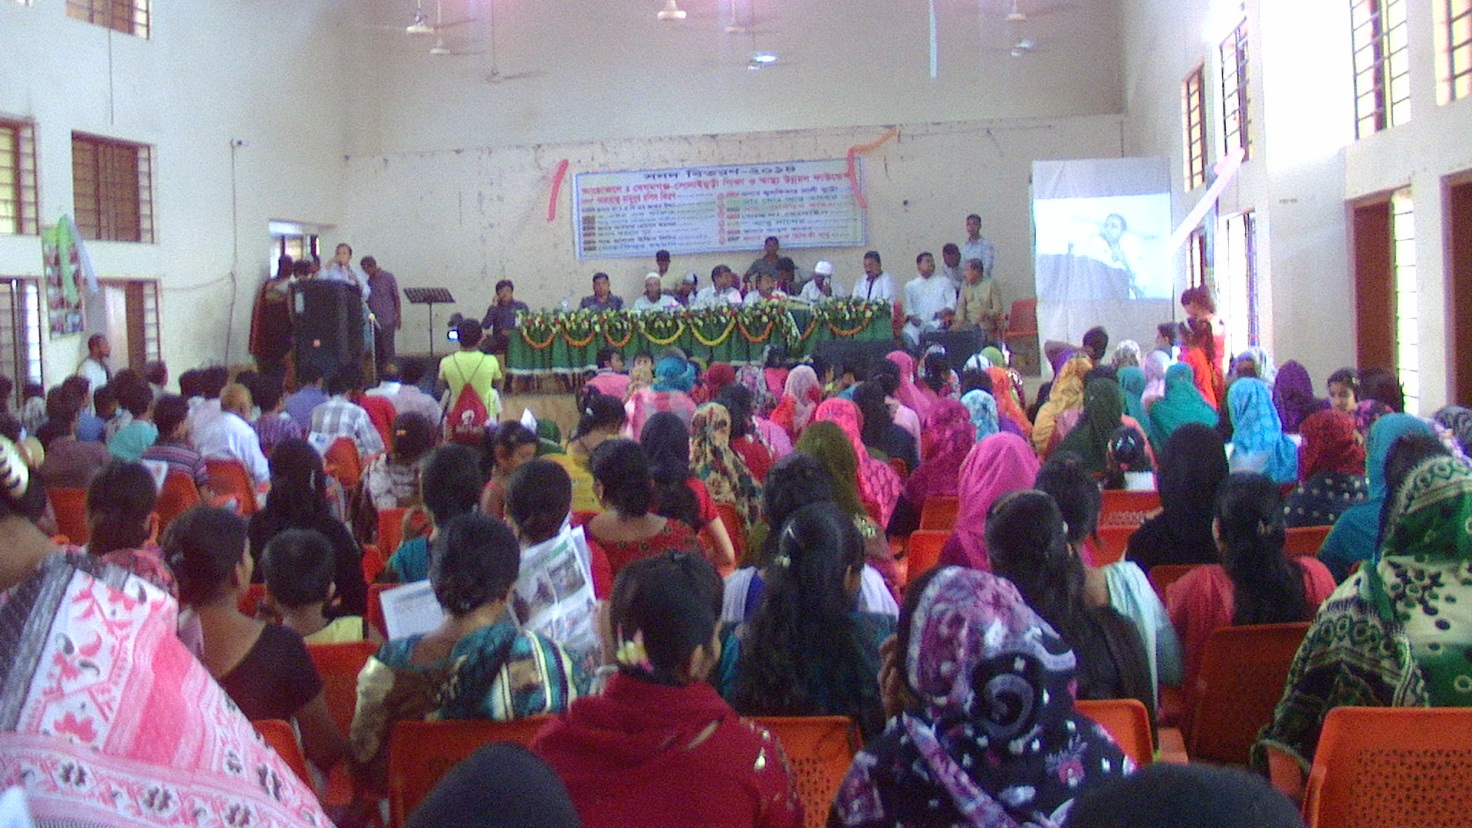 Mr. Farhad Noor, Deputy Director, Youth Development, speaking at the distribution of certificates and cultural program to the students of Begumganj Technical and Computer Institute, an institution under Begumganj-Sonaimuri Education and Health Development Foundation. Noakhali-3 MP Mamunur Rashid Kiran, District Council Chairman Dr ABM Zafar Ullah, Municipal Mayor Akhter Hossain Faisal and many others were present on the occasion.